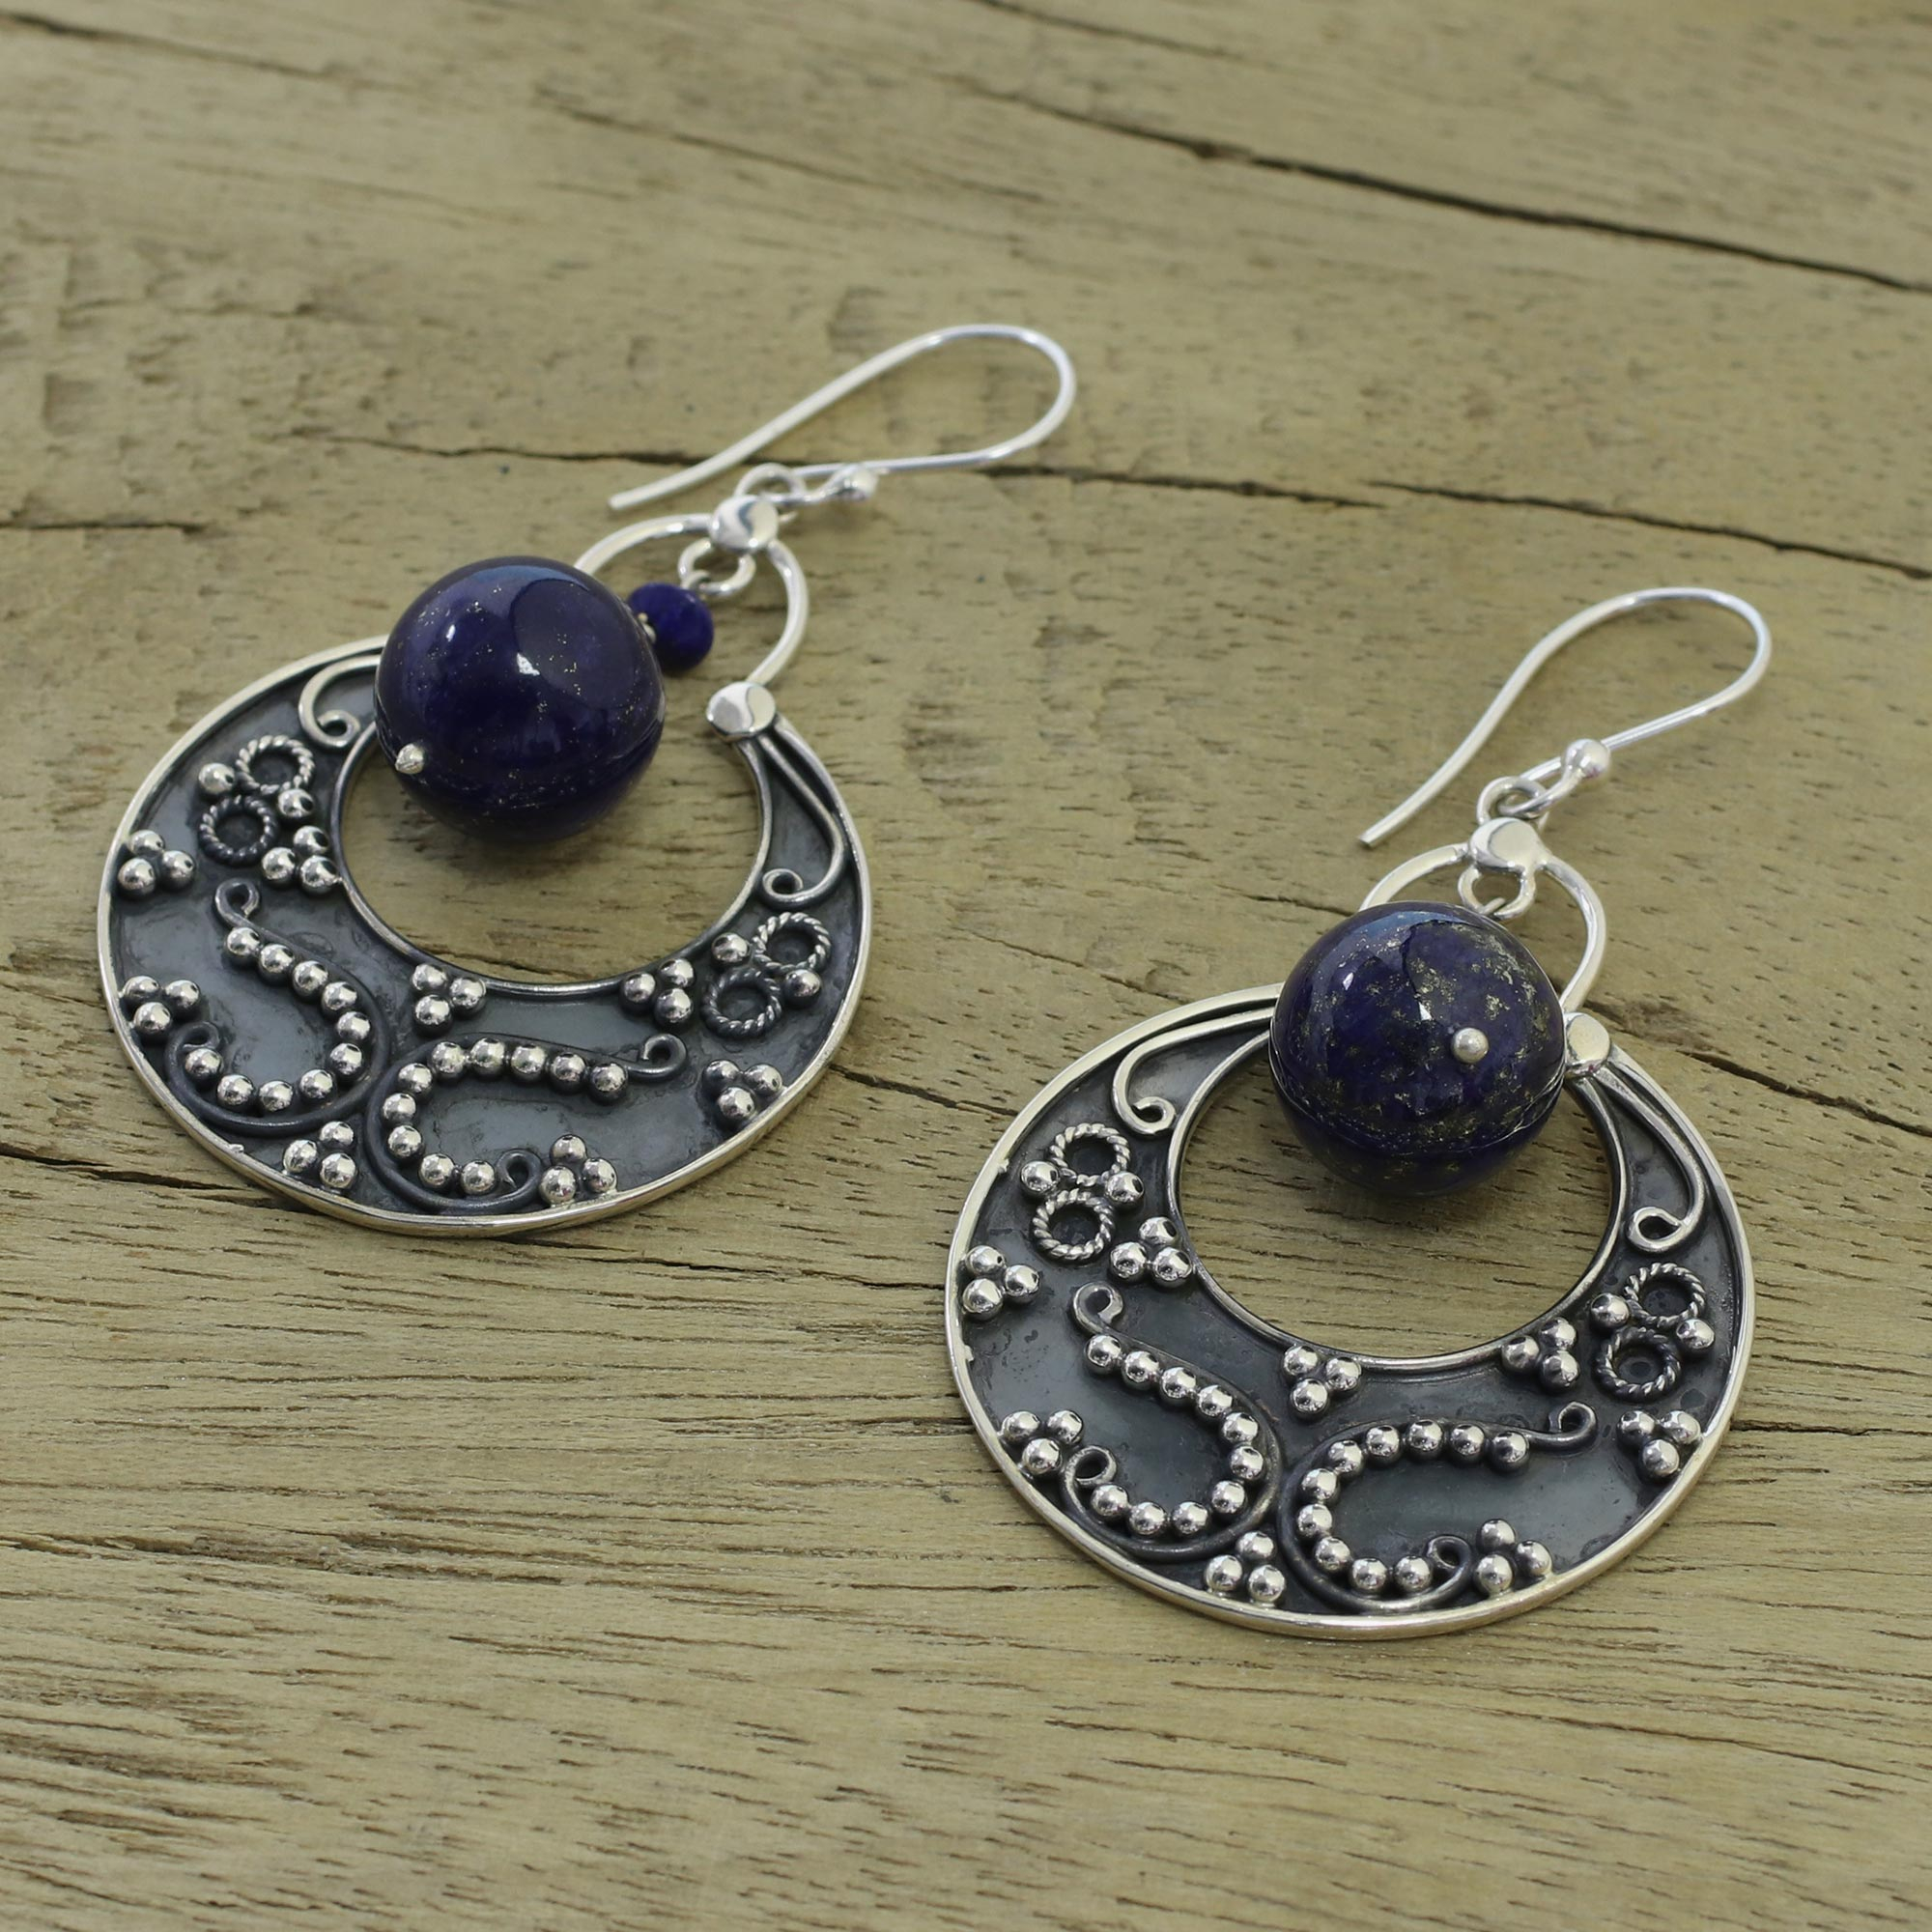 UNICEF Market | Unique Sterling Silver Lapis Lazuli Earrings with Flair ...